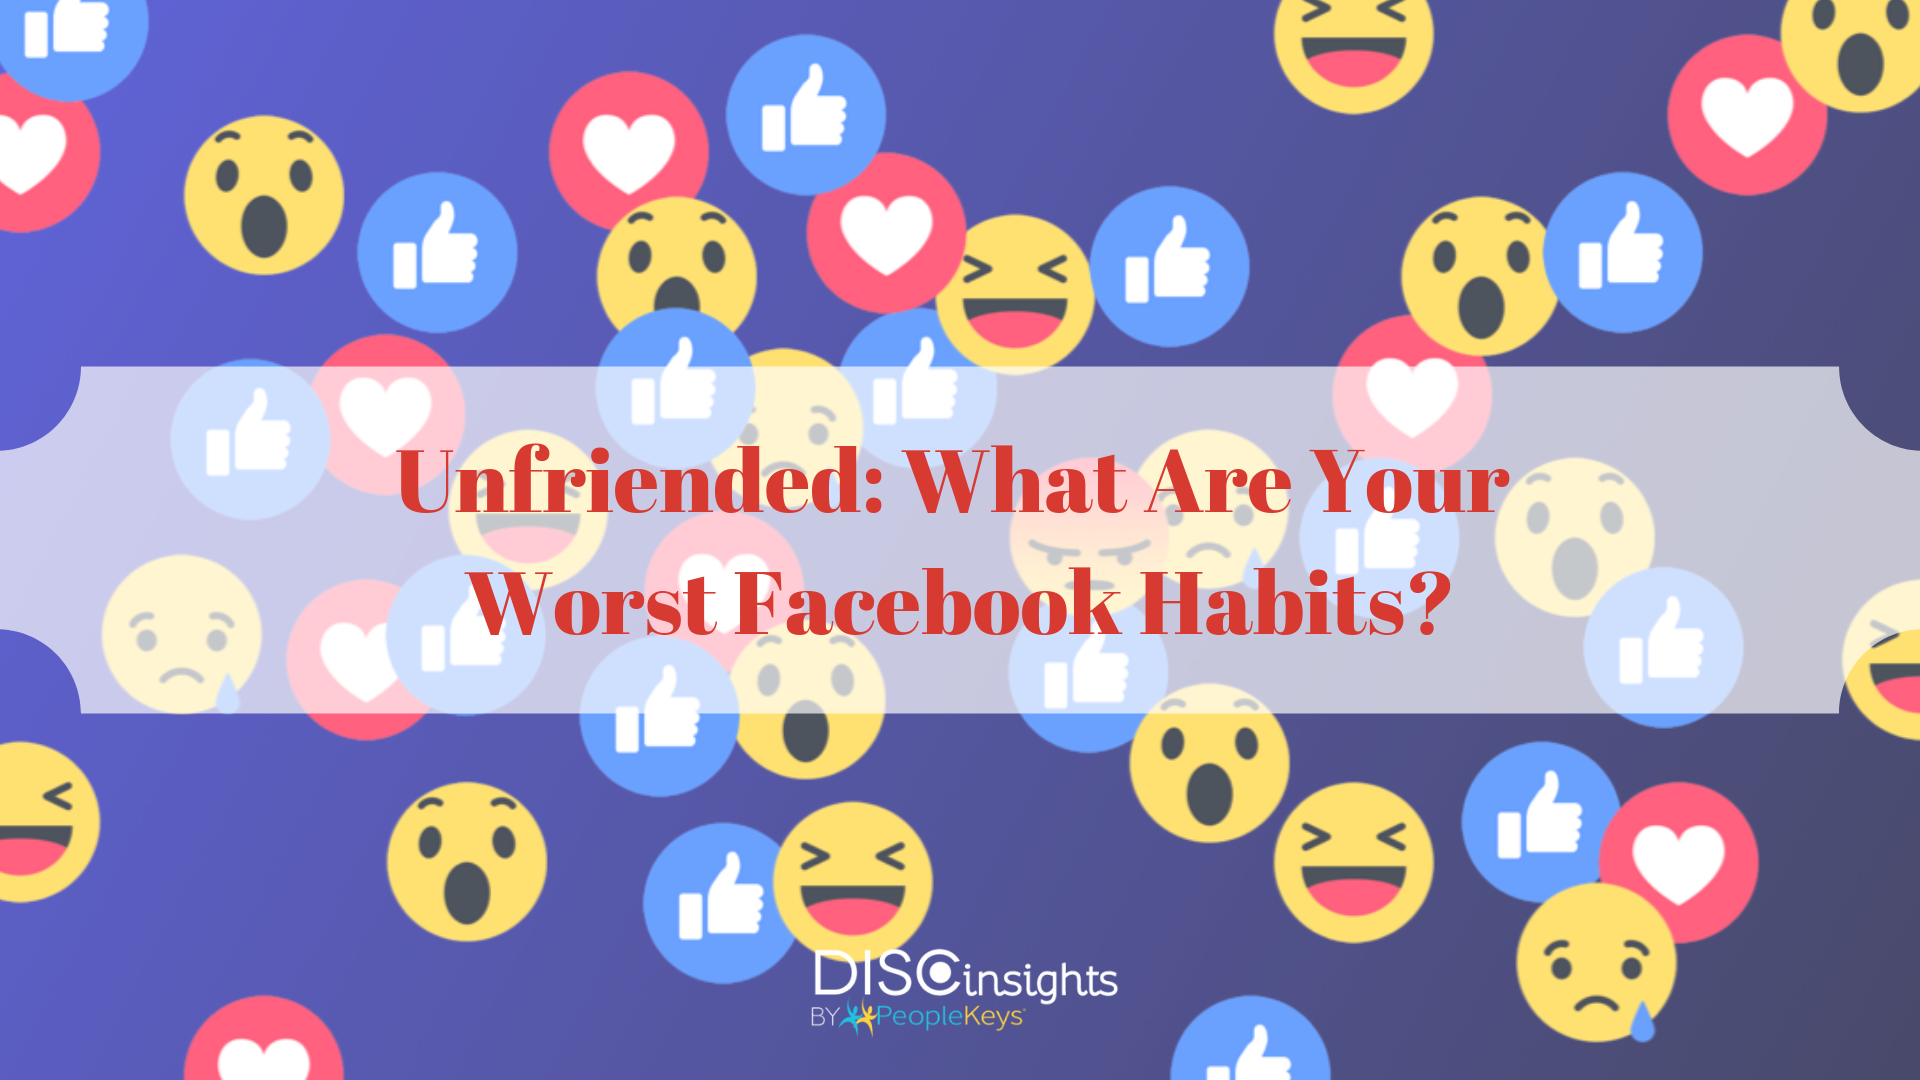 Unfriended: What Are Your Worst Facebook Habits?